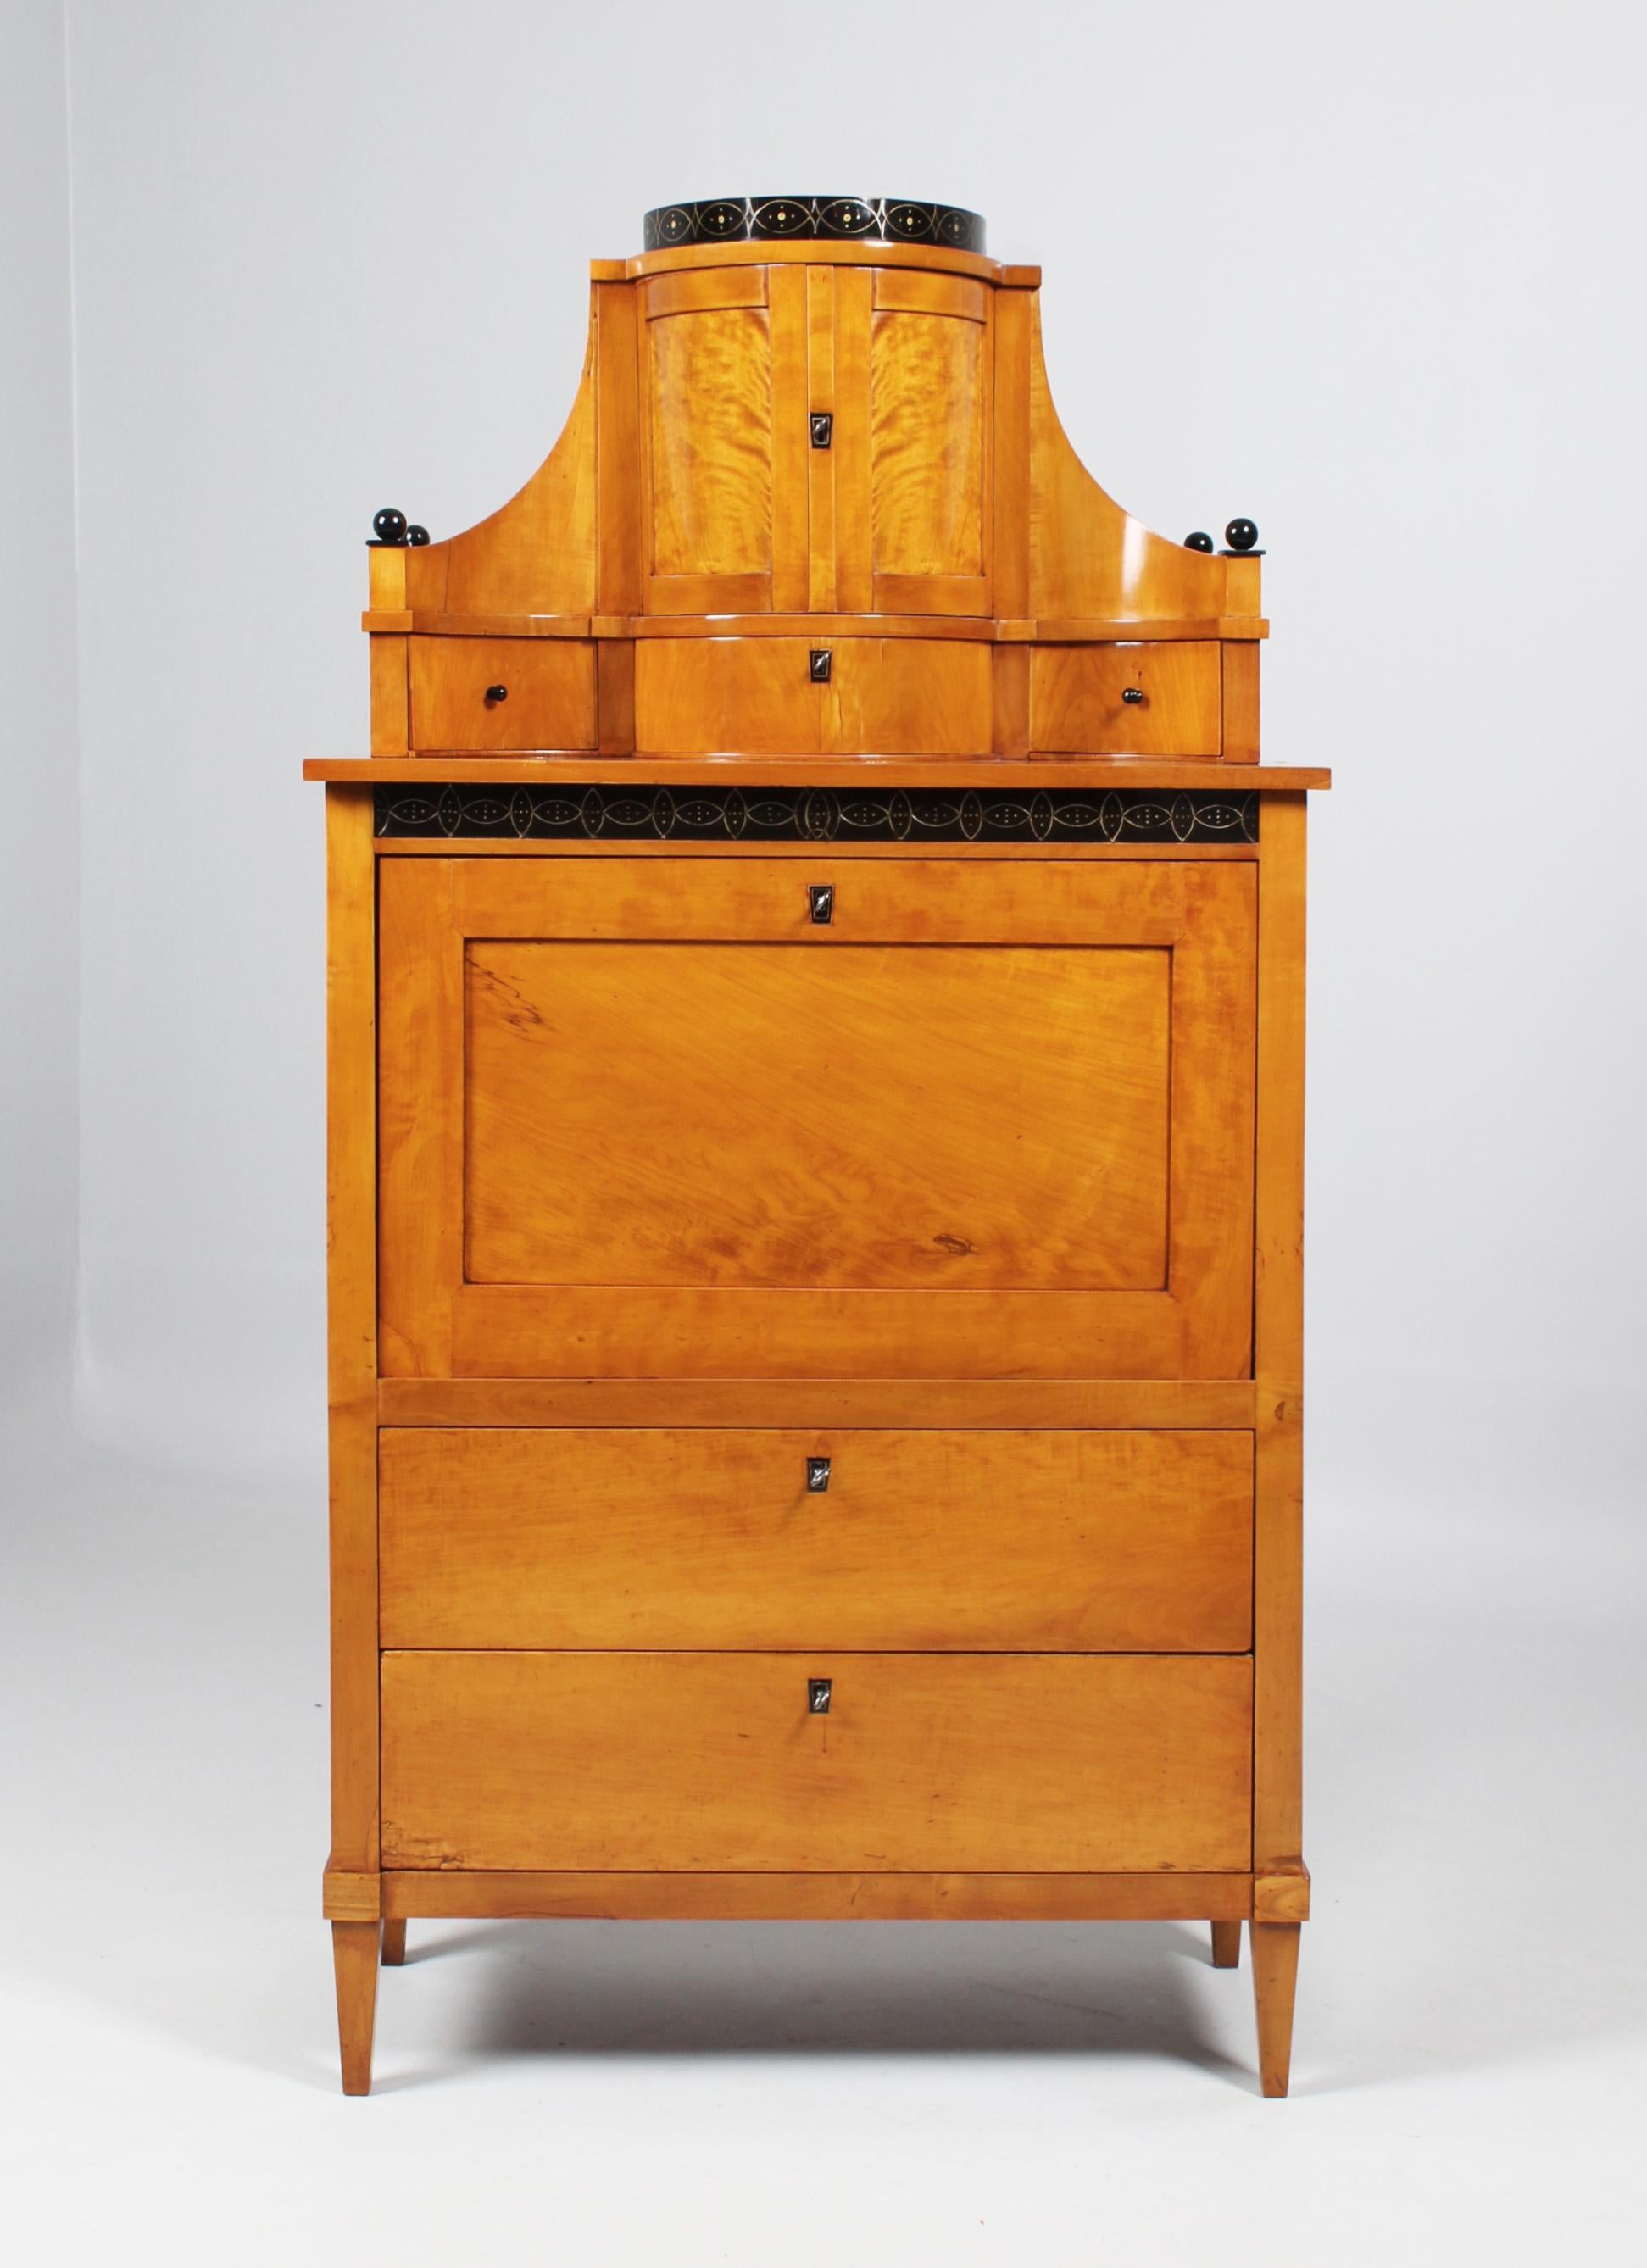 Extraordinary top secretary

Northern Germany
Maple
Biedermeier around 1815

Dimensions: H x W x D: 189 x 100 x 46 cm

Description:
Strictly cubist piece of furniture standing on pointed legs.

In the lower section we see two large drawers. Above